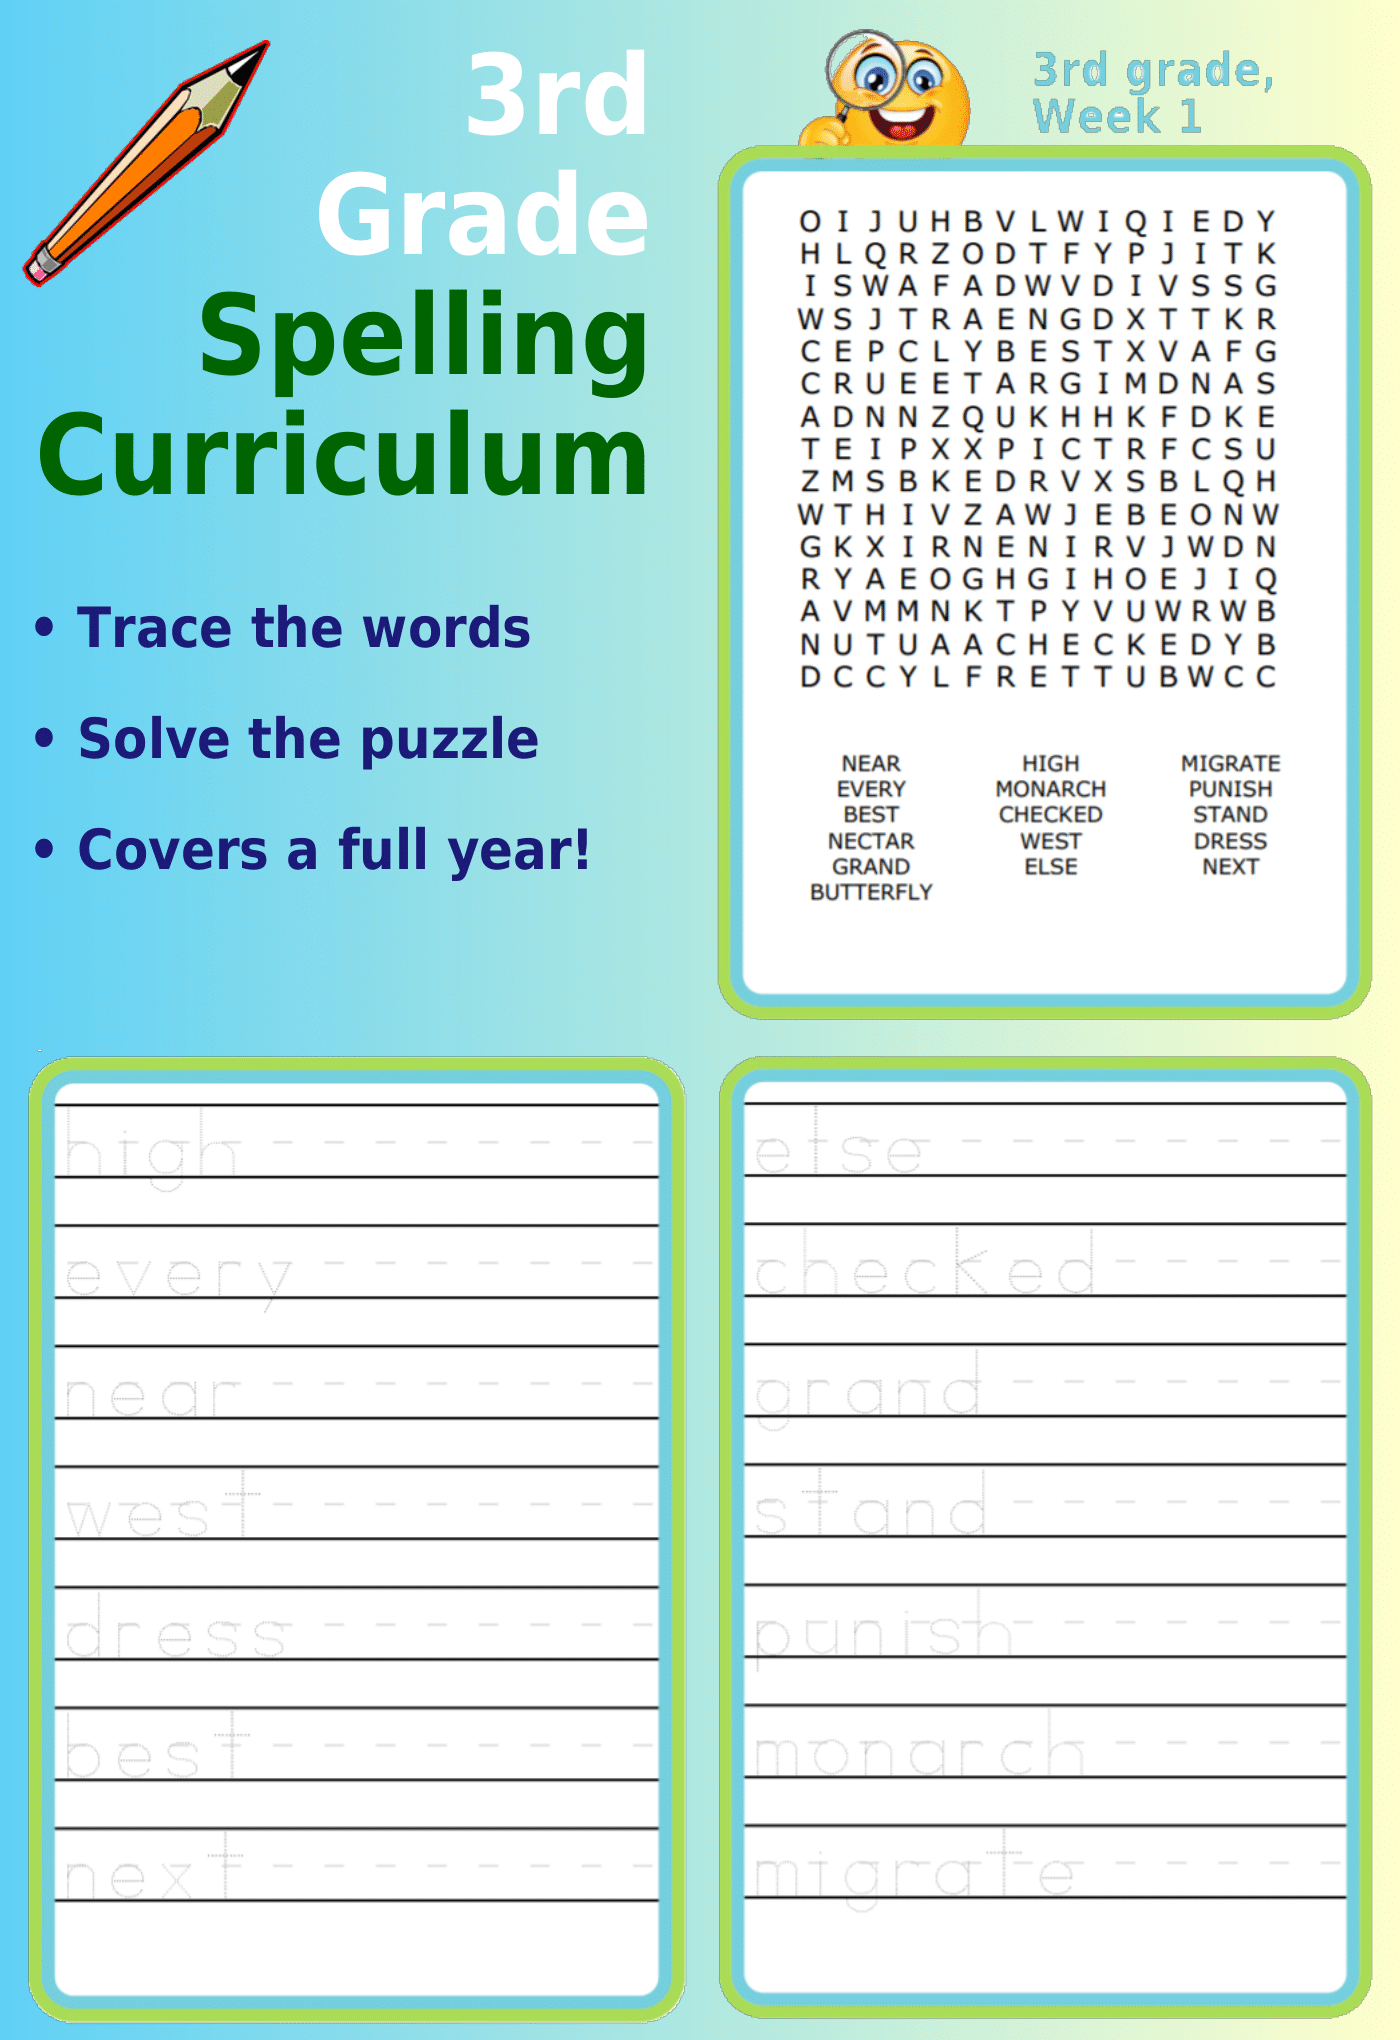 3rd Grade Spelling Curriculum: Word search and letter tracing